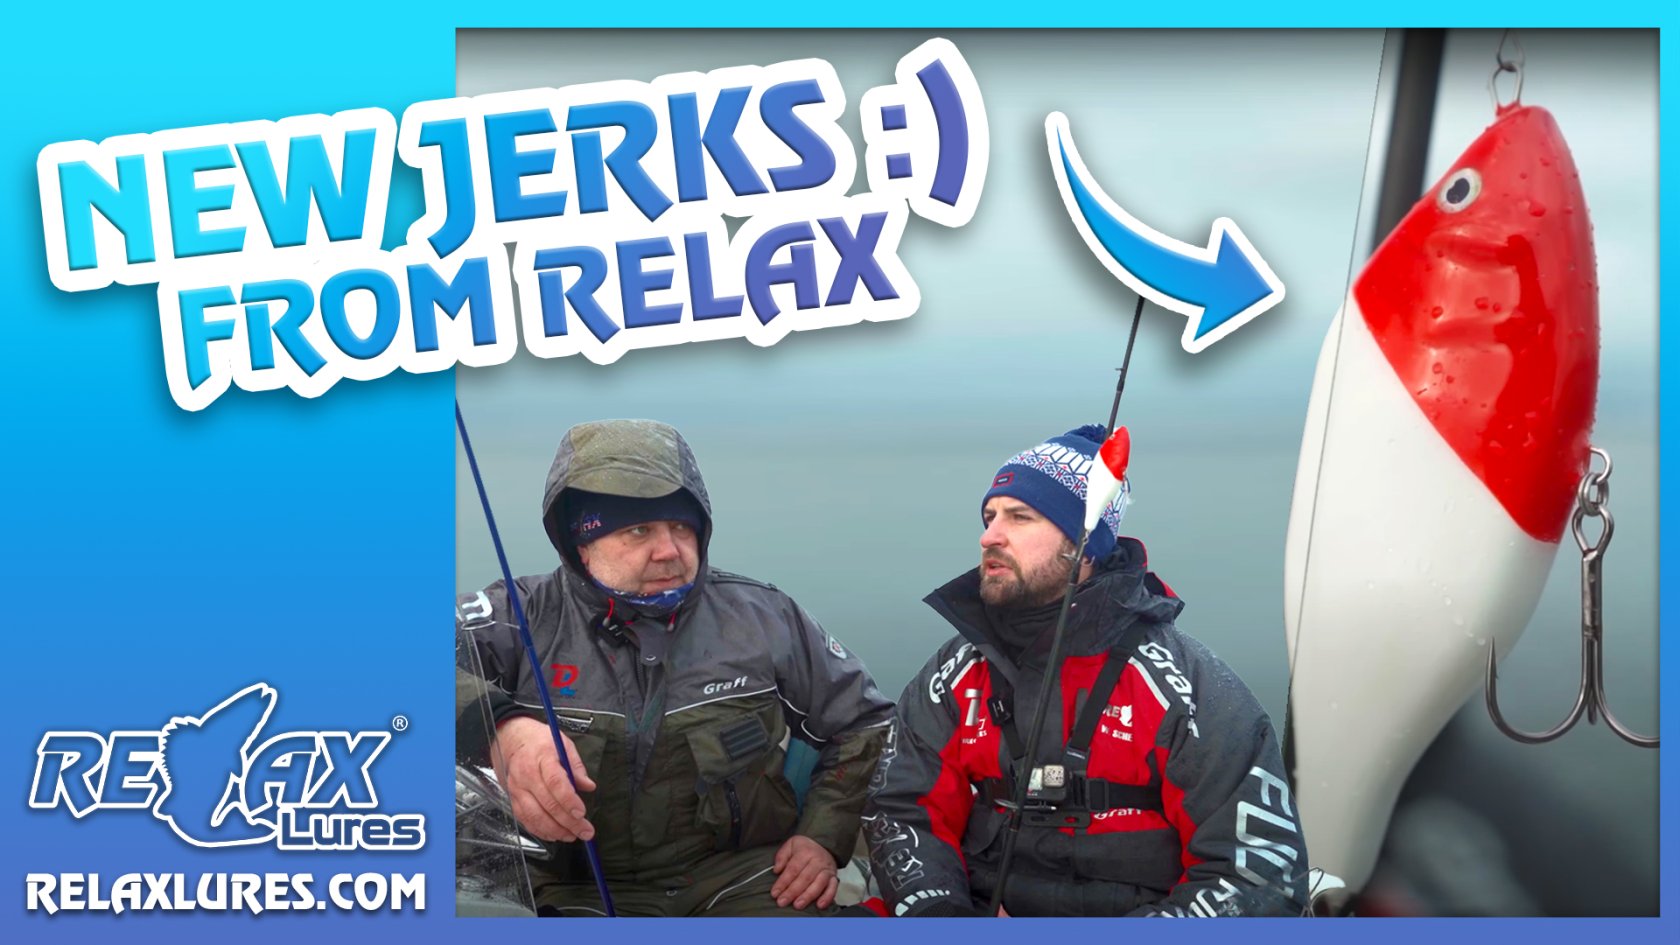 NEW PRODUCTS IN OFFER - RELAX JERKS - RELAX LURES